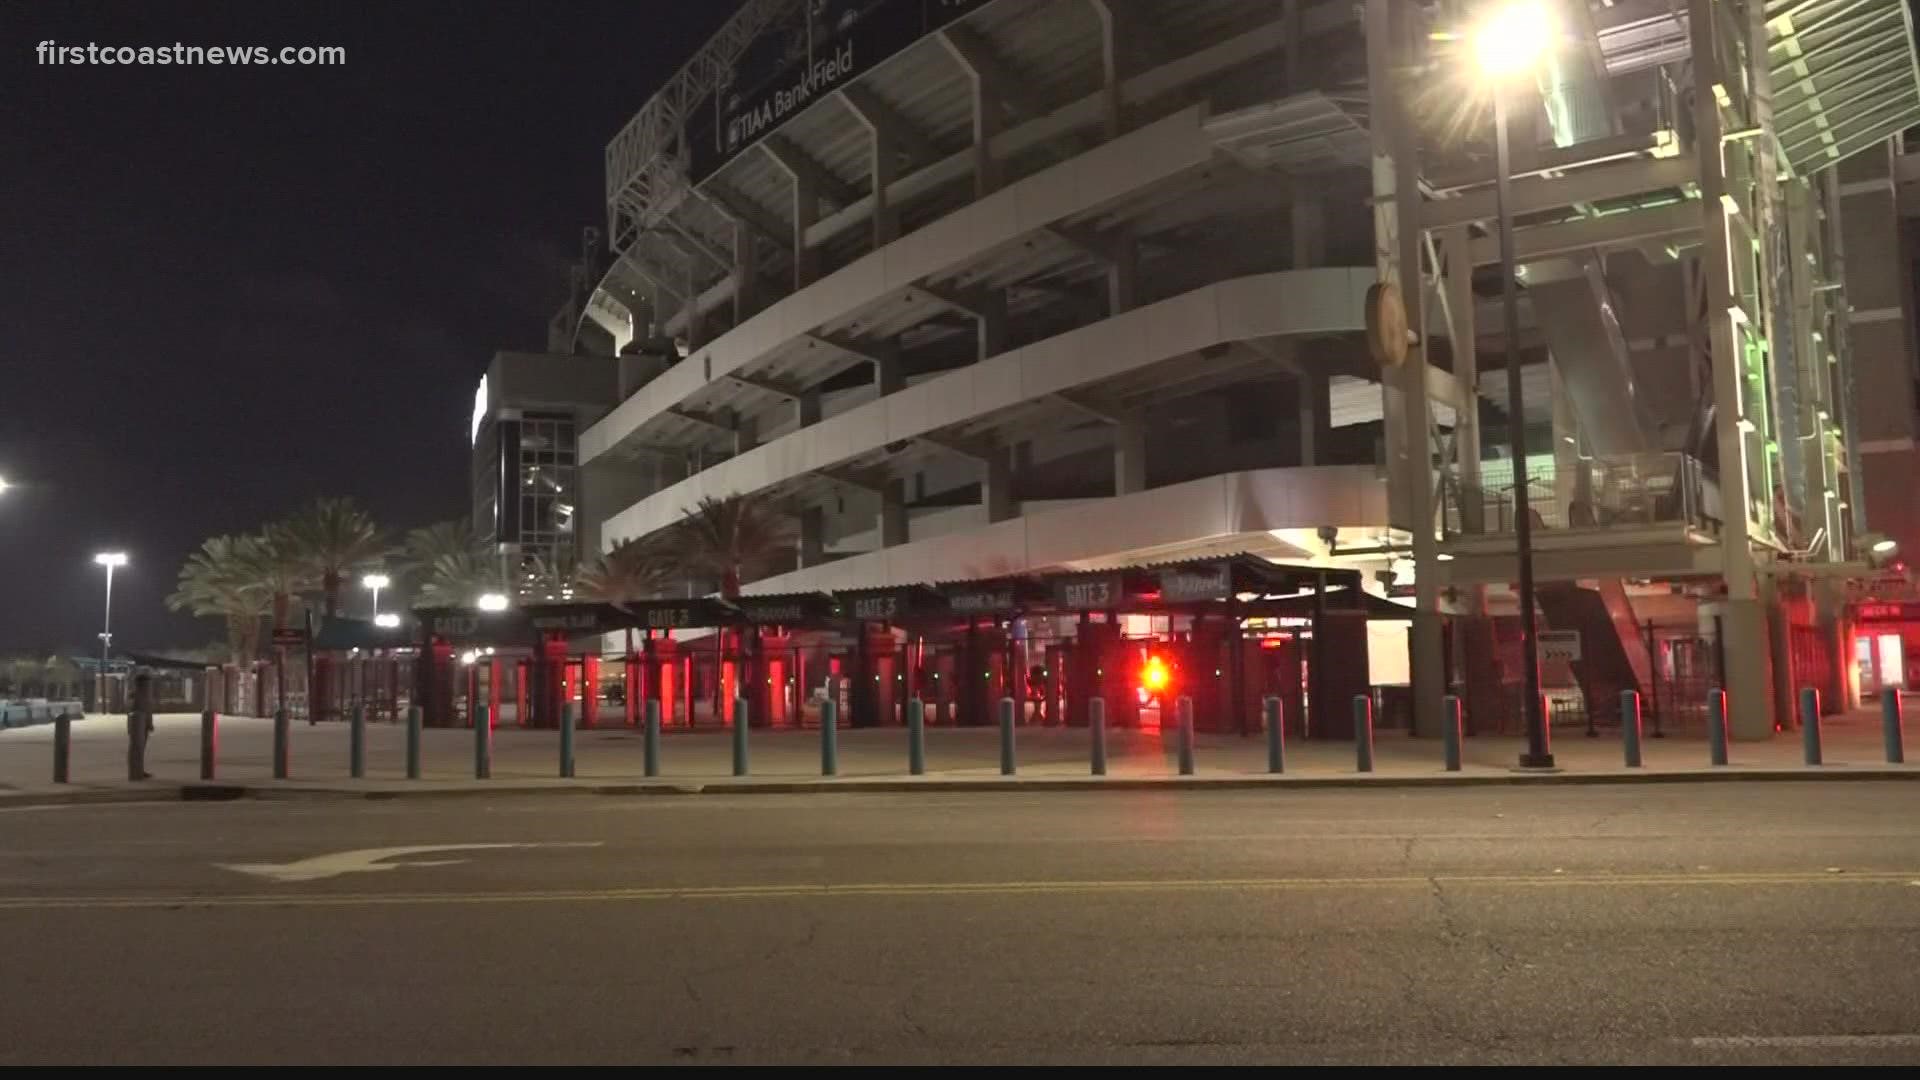 When they arrived, JFRD discovered a golf cart charging station located inside the stadium along the east side where carts were plugged in had caught on fire.